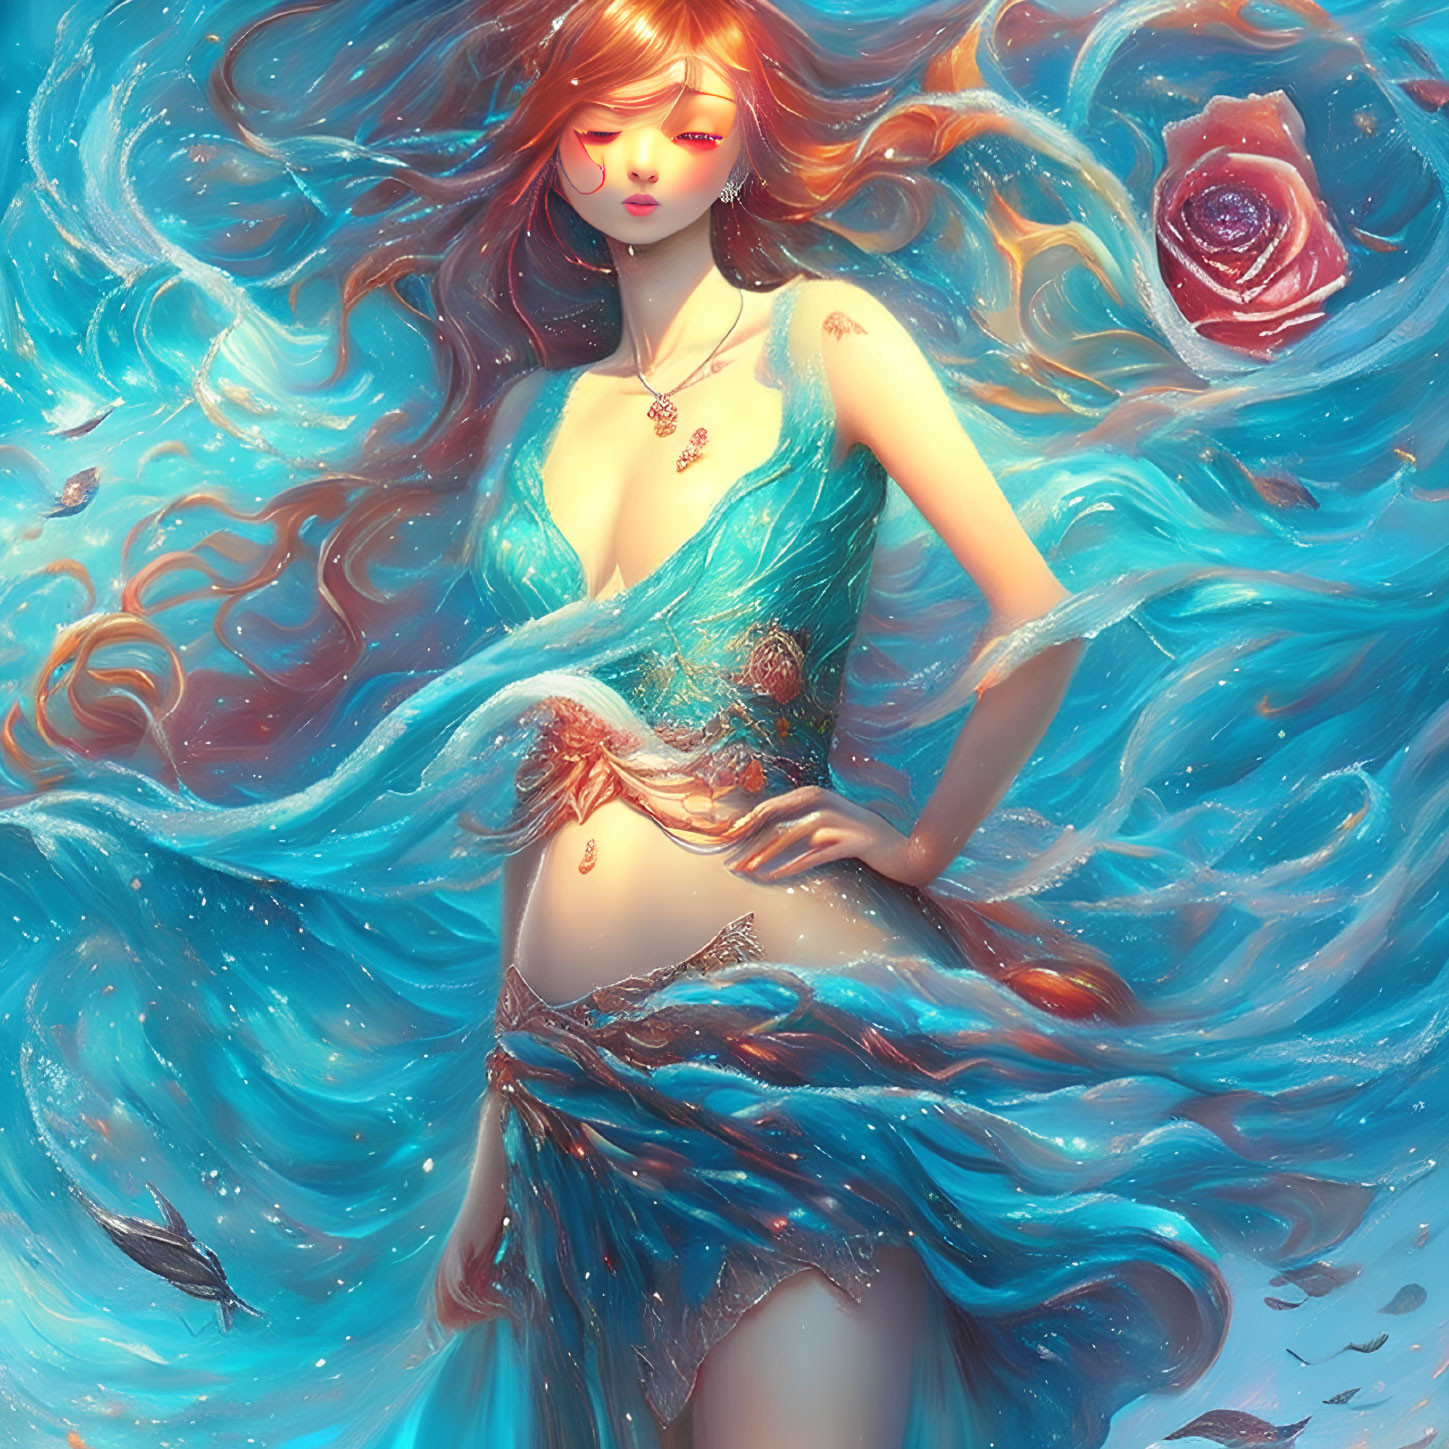 Ethereal woman with turquoise hair in sea-themed dress amid swirling ocean backdrop